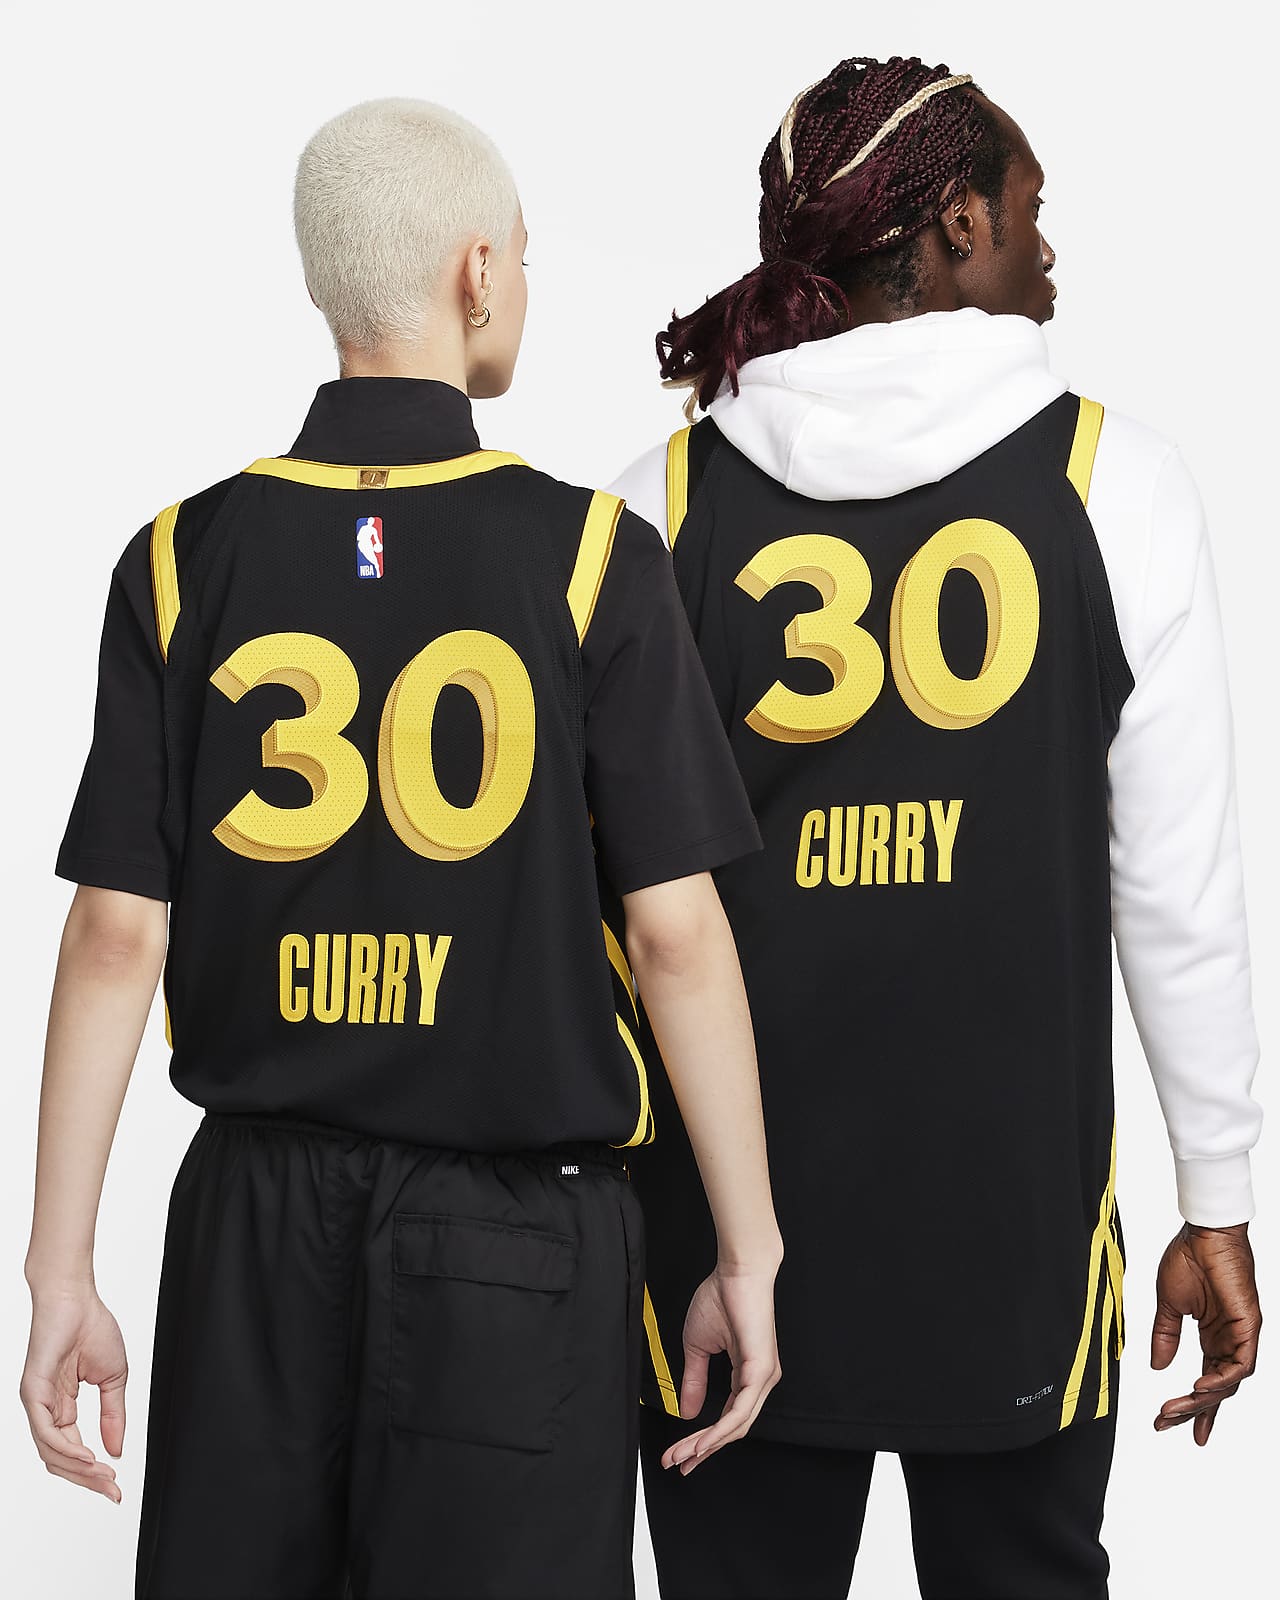 Men's Nike Stephen Curry Black Golden State Warriors Authentic Jersey - City Edition